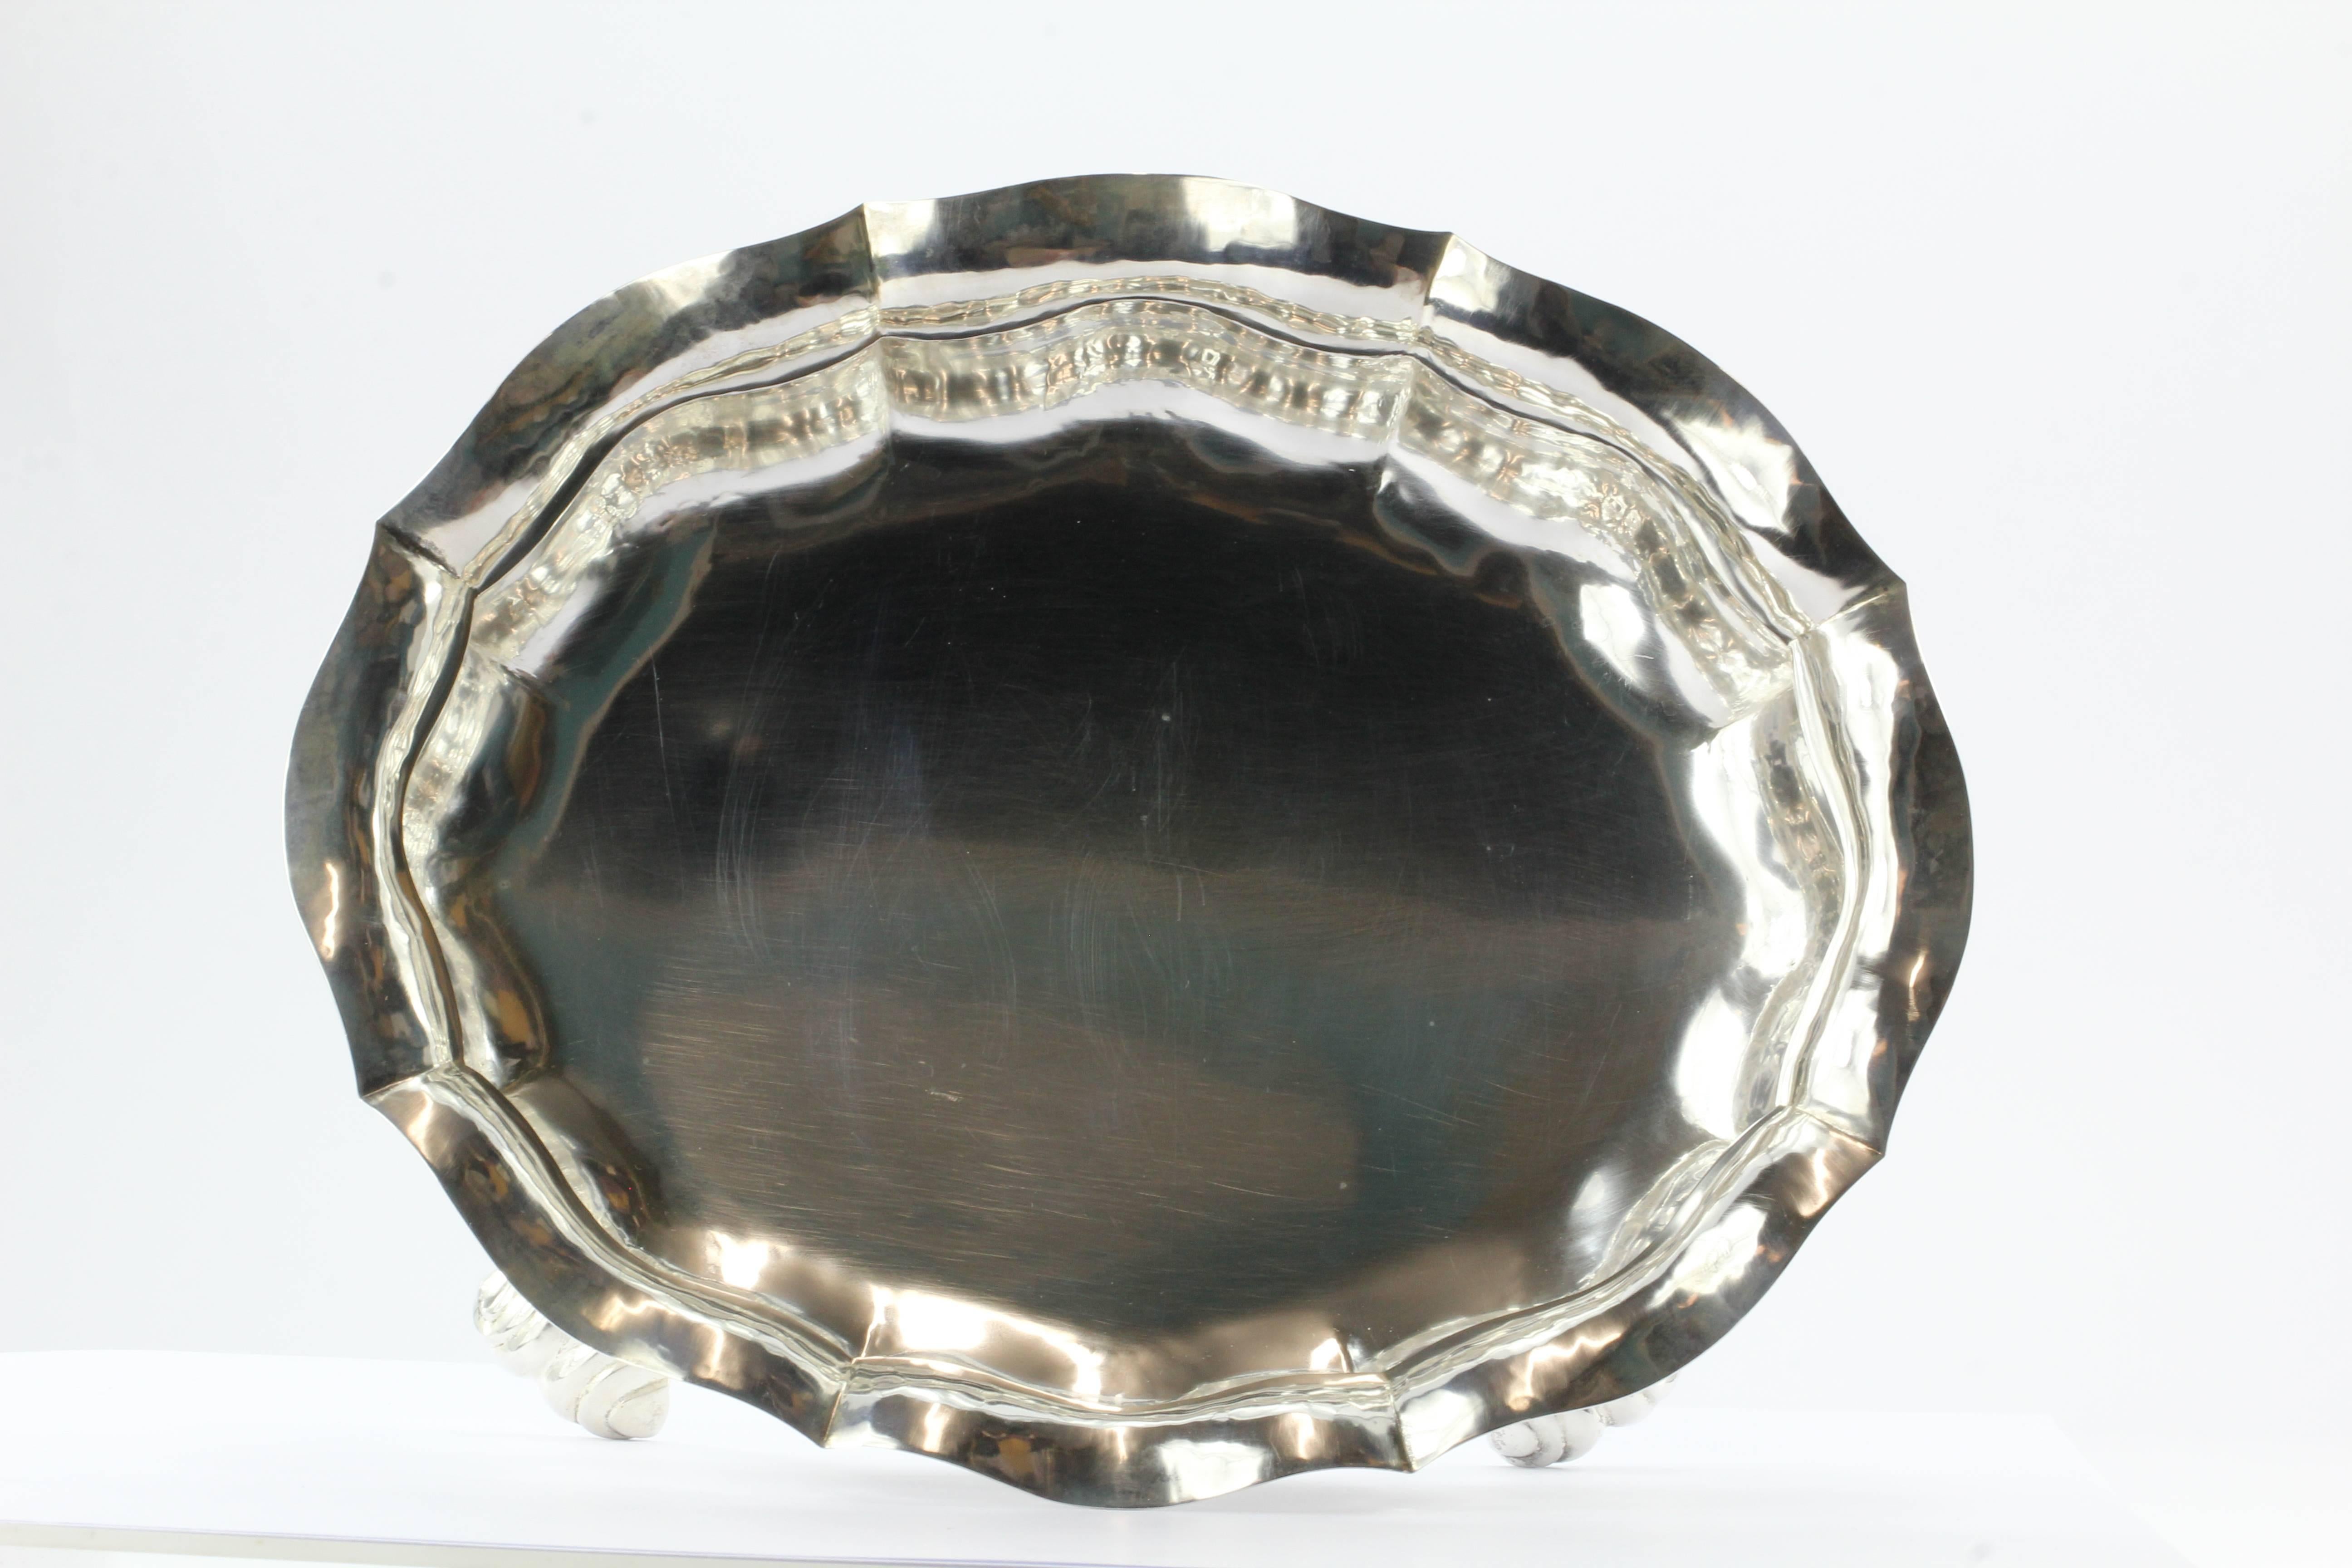 Buccellati sterling silver handcrafted Italian fluted bowl. The piece is in excellent estate condition and ready to wear. The piece is signed on the bottom 